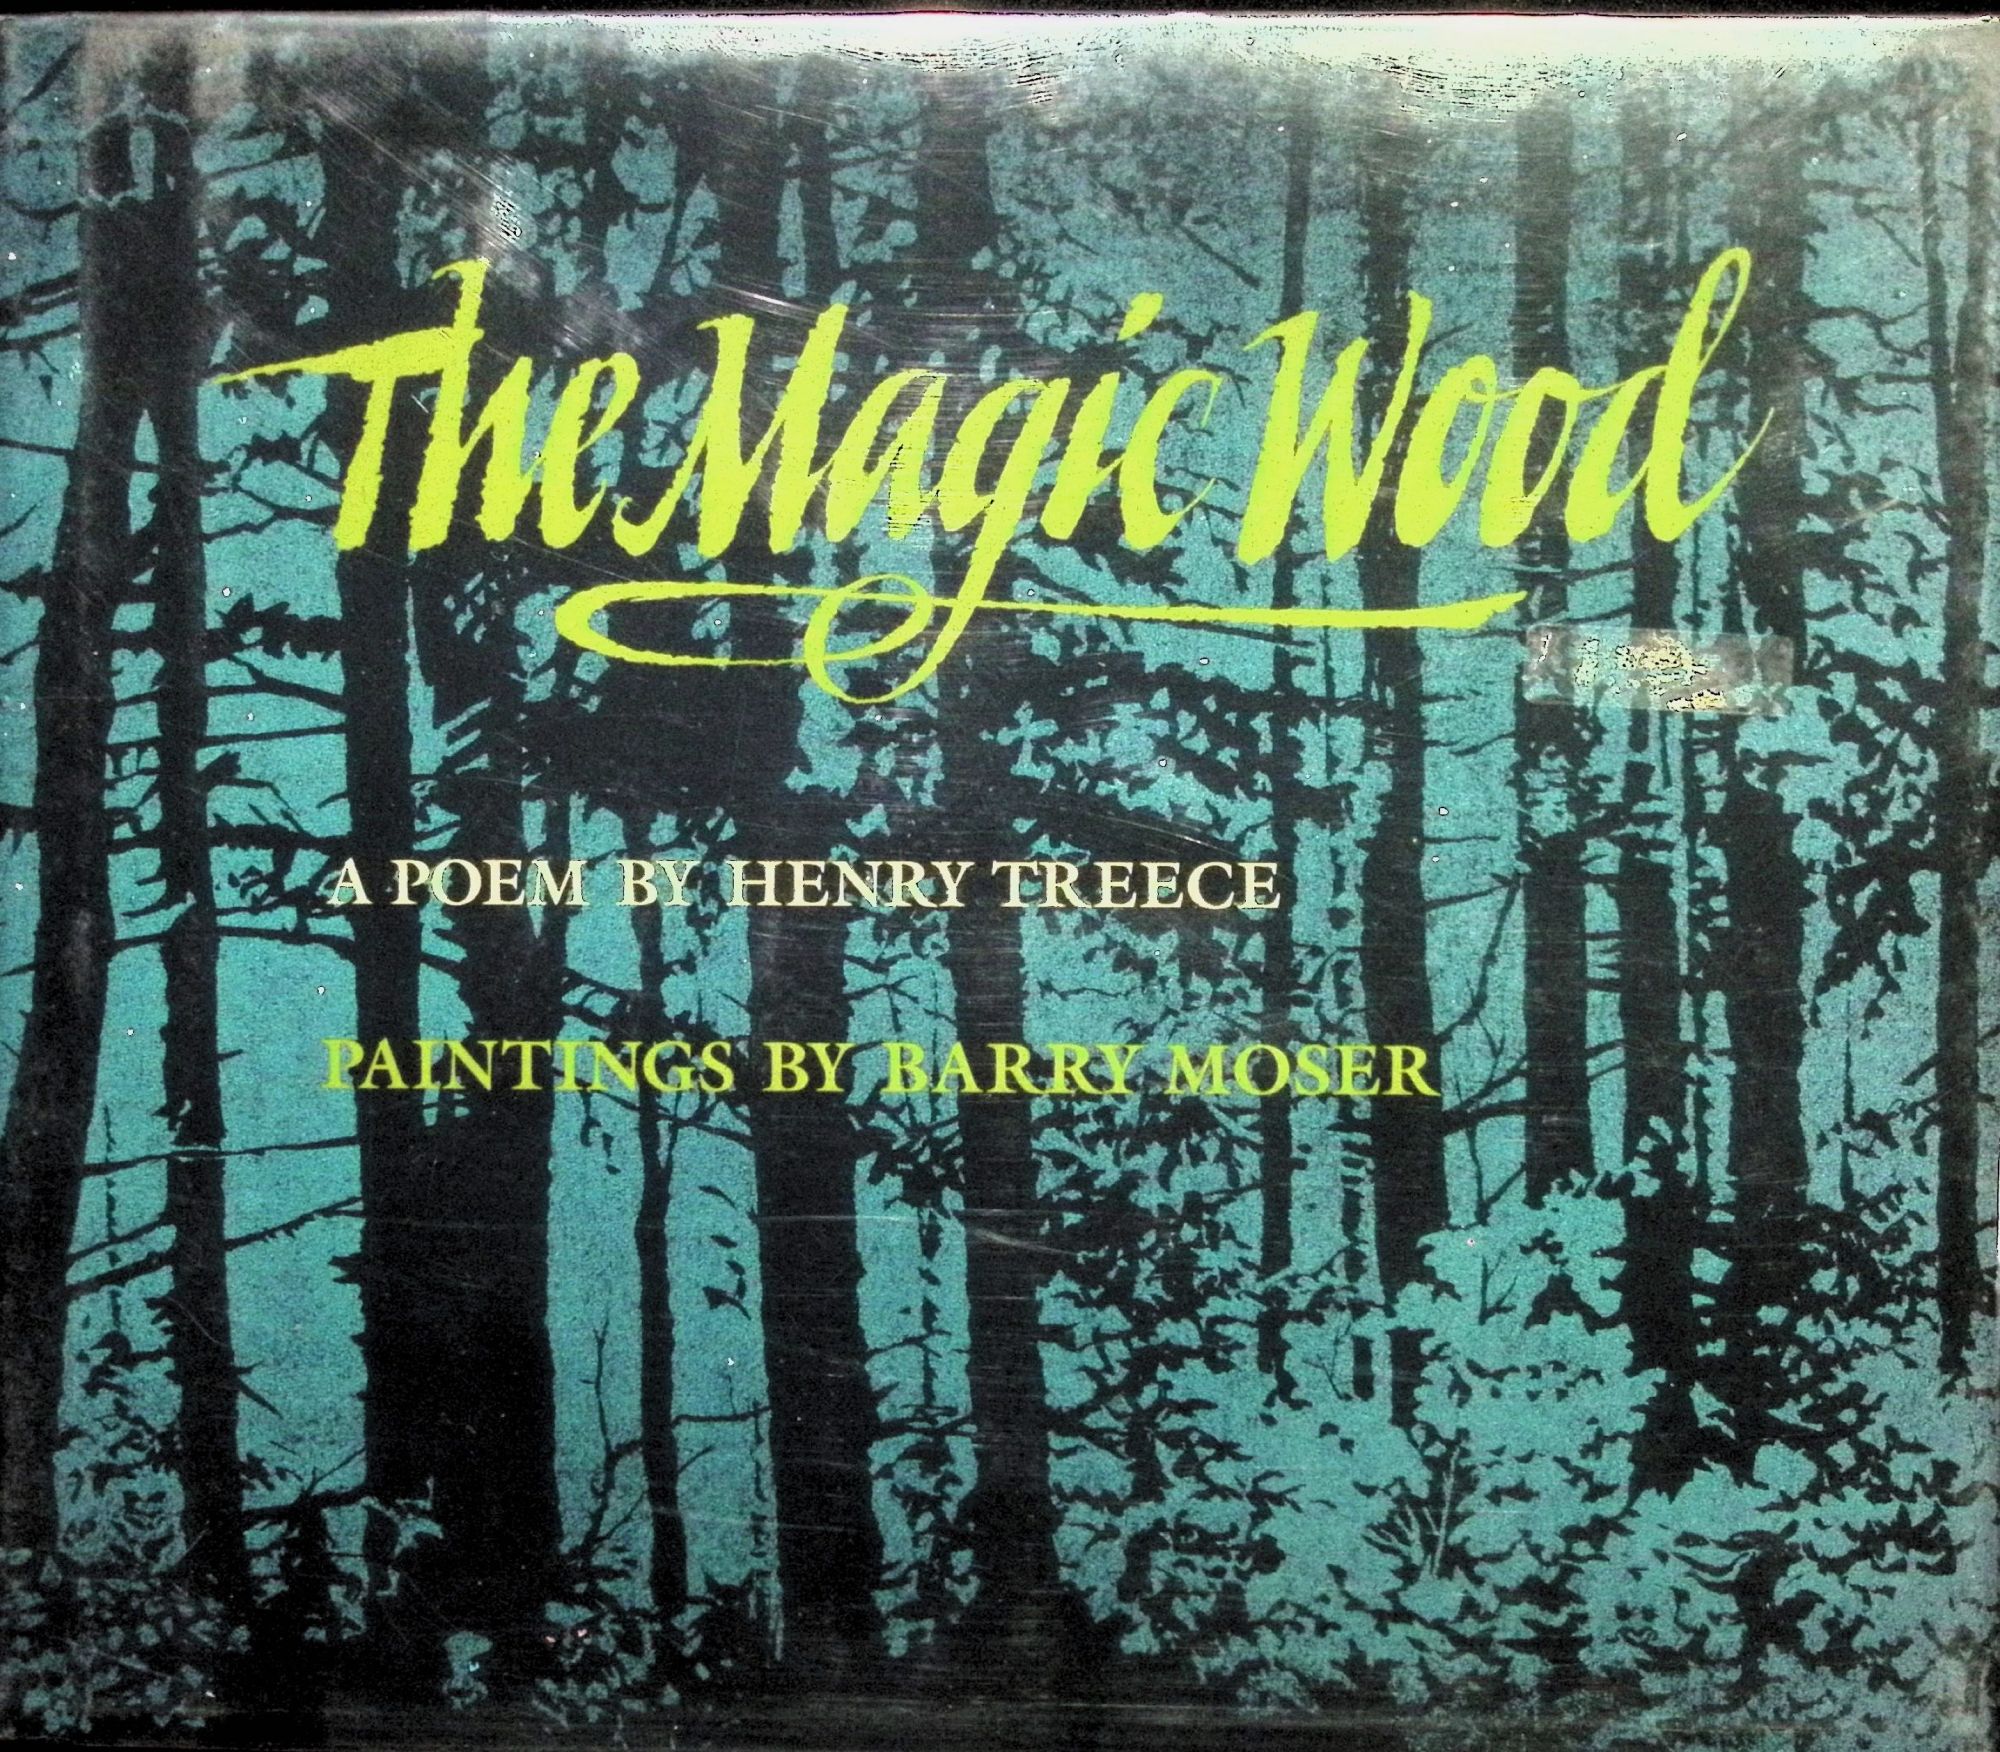 The　A　Poem　Magic　Henry　Wood:　First　Edition　Signed　Treece